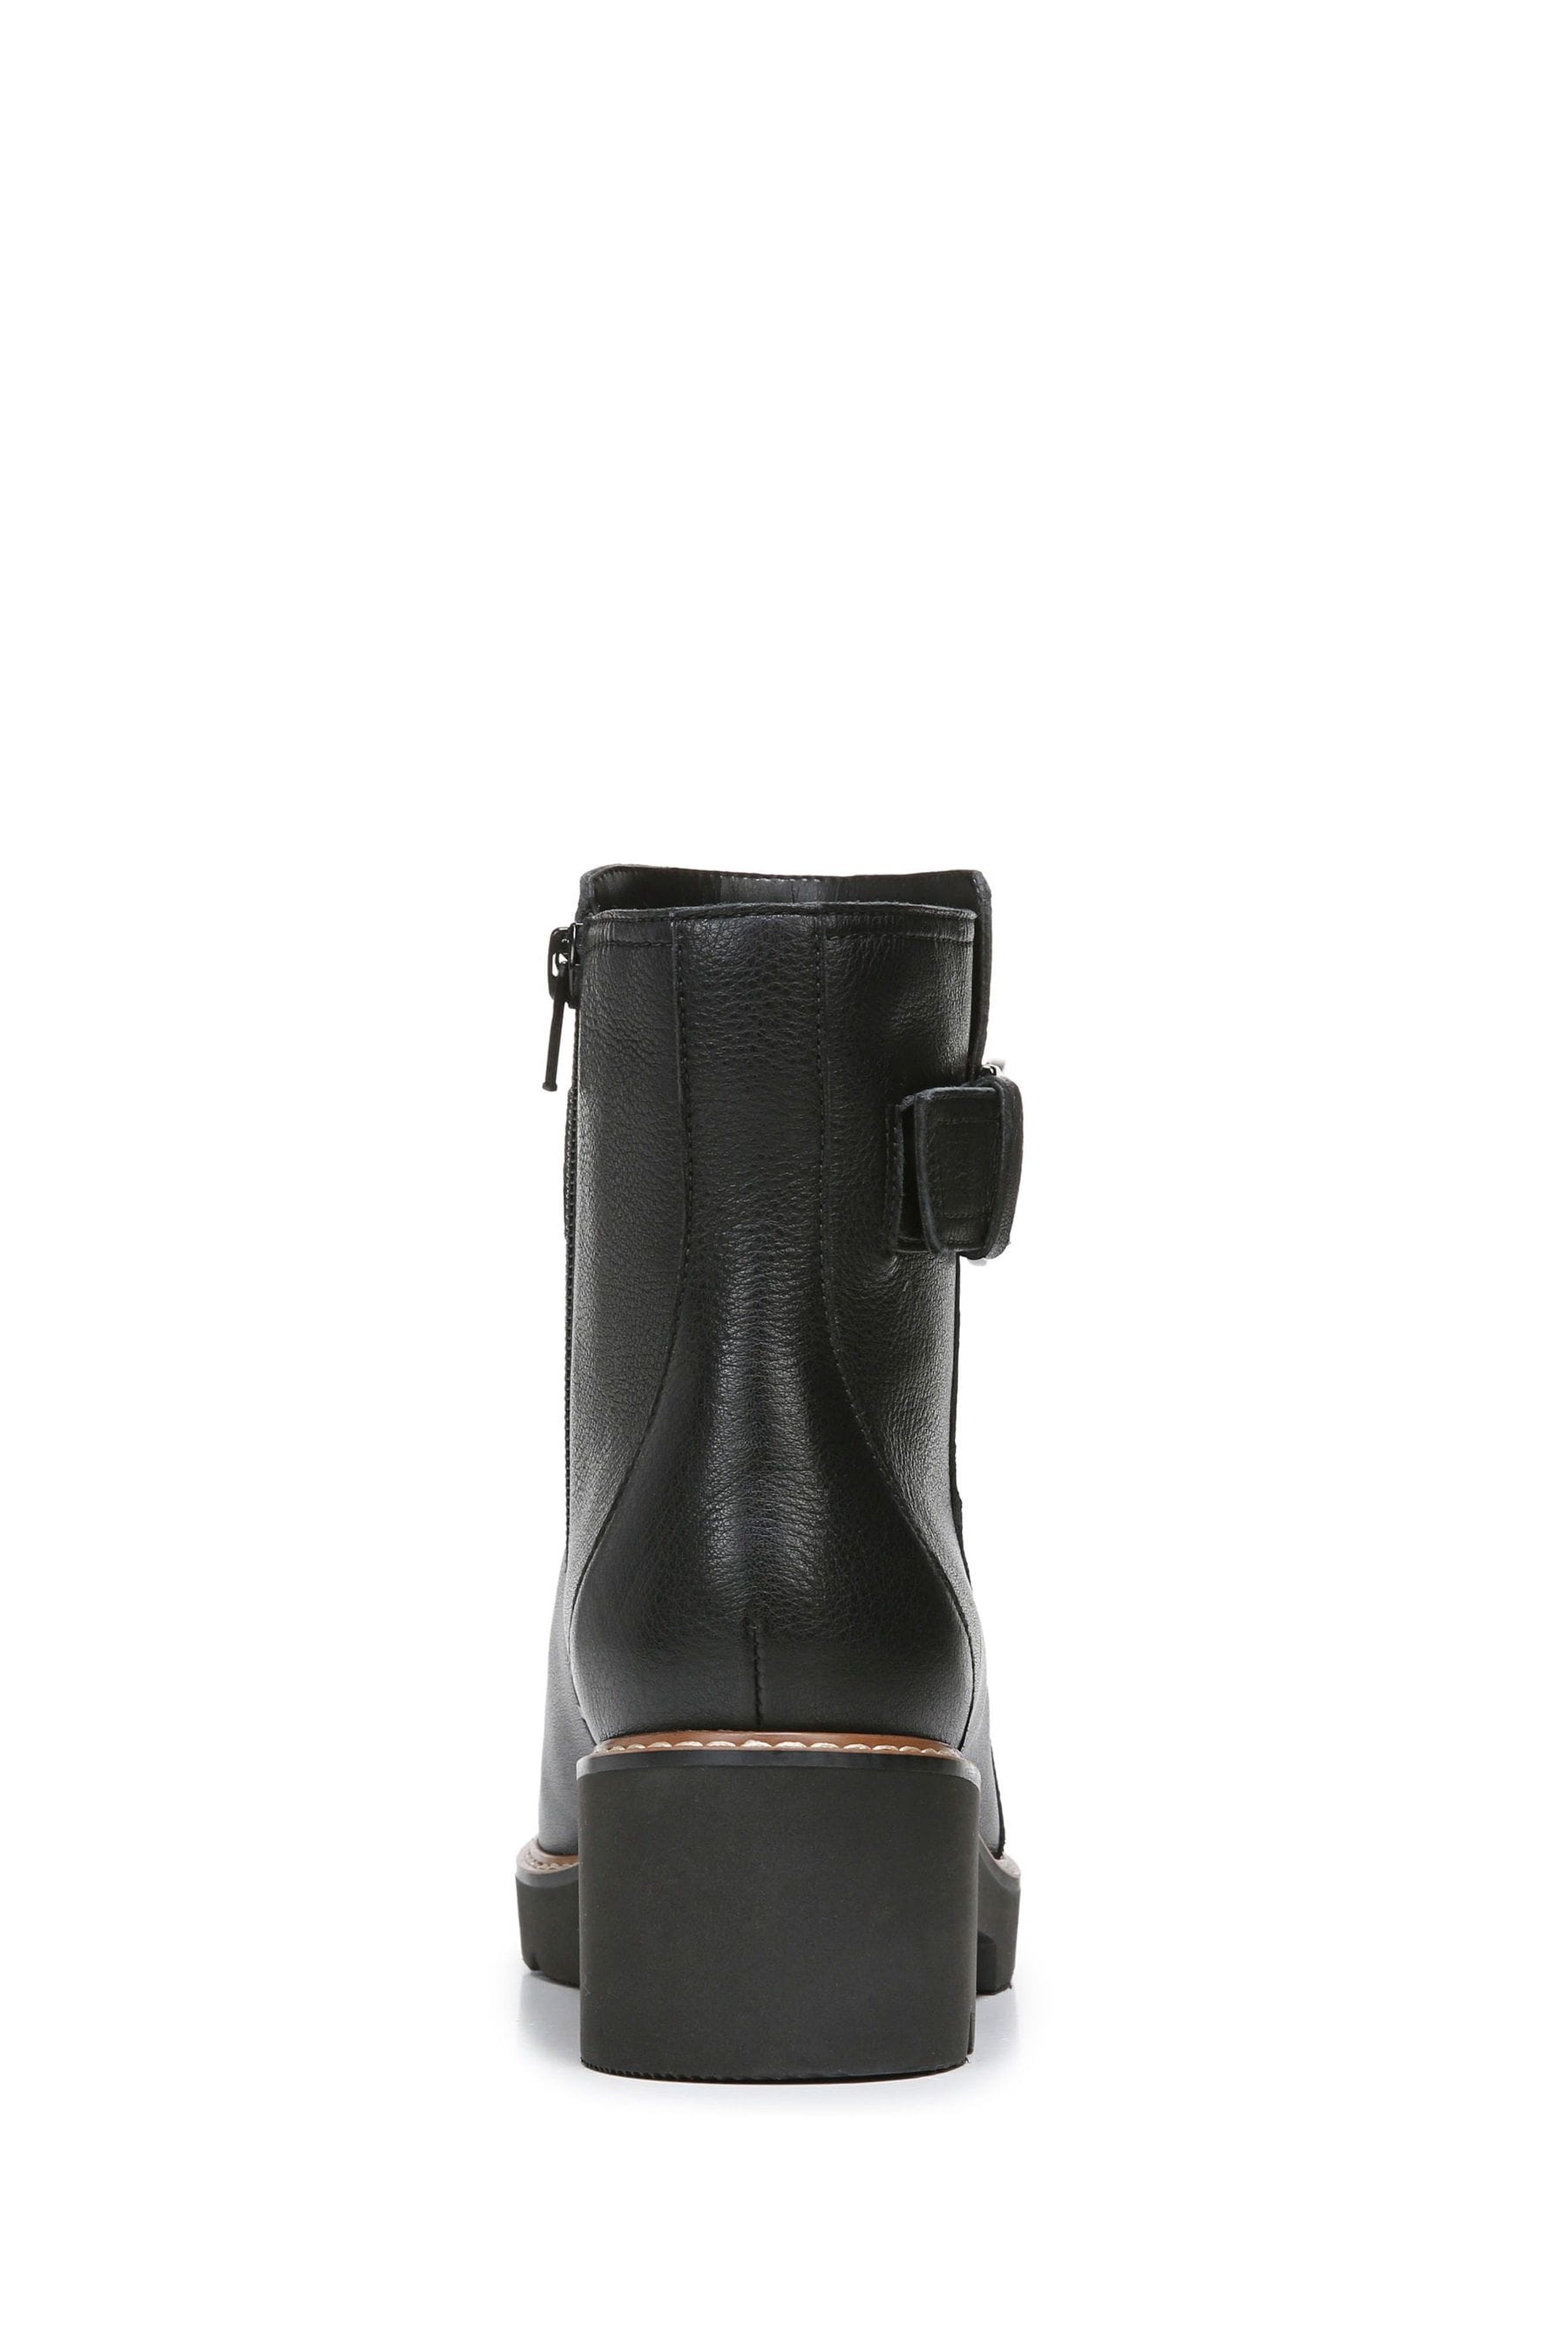 Buy Naturalizer Dasha Ankle Leather Boots from the Next UK online shop